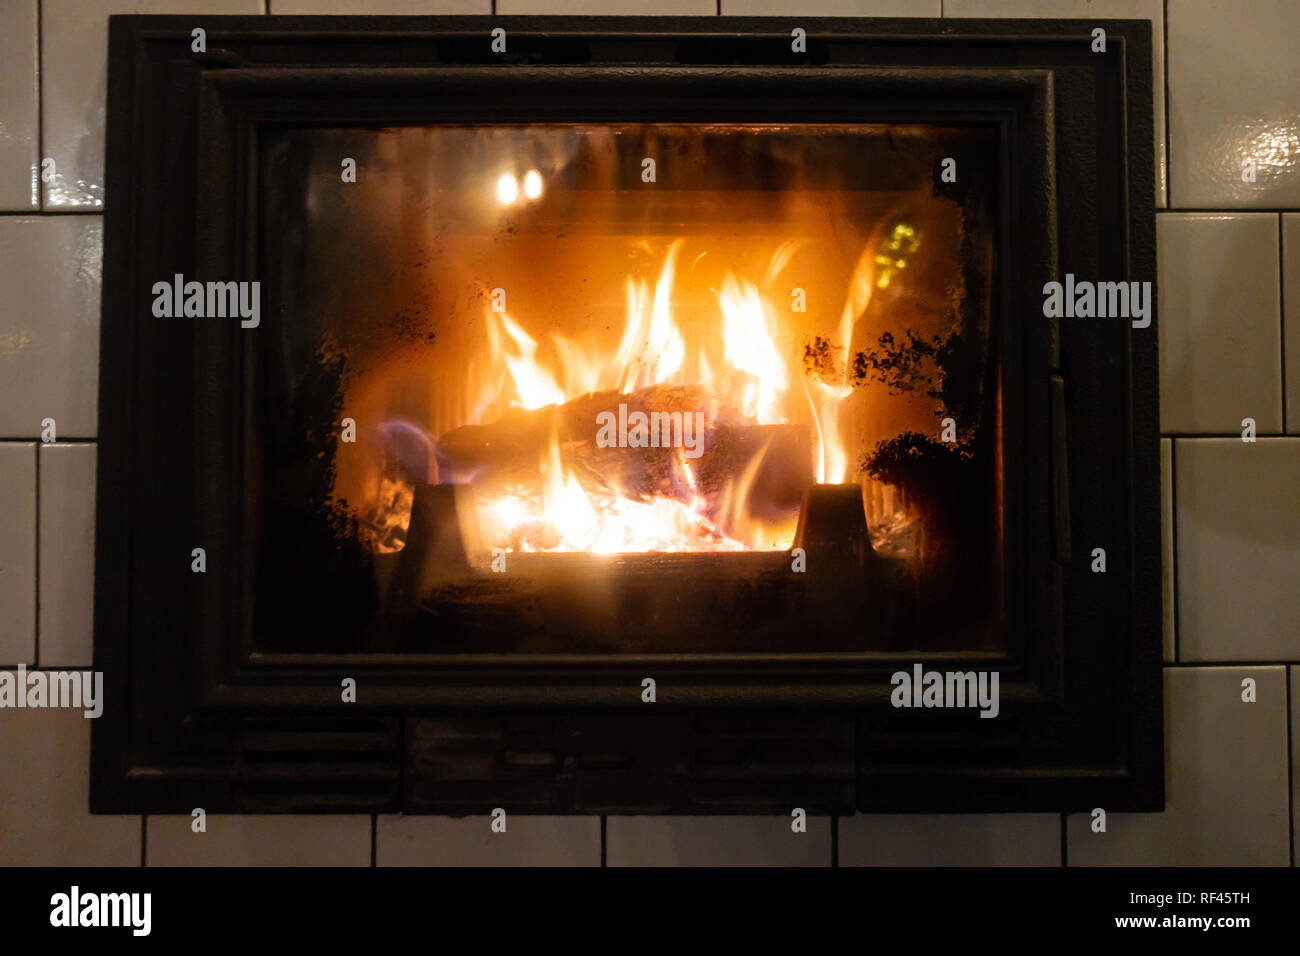 A log burning in a wood burner provides heat for the room. Stock Photo